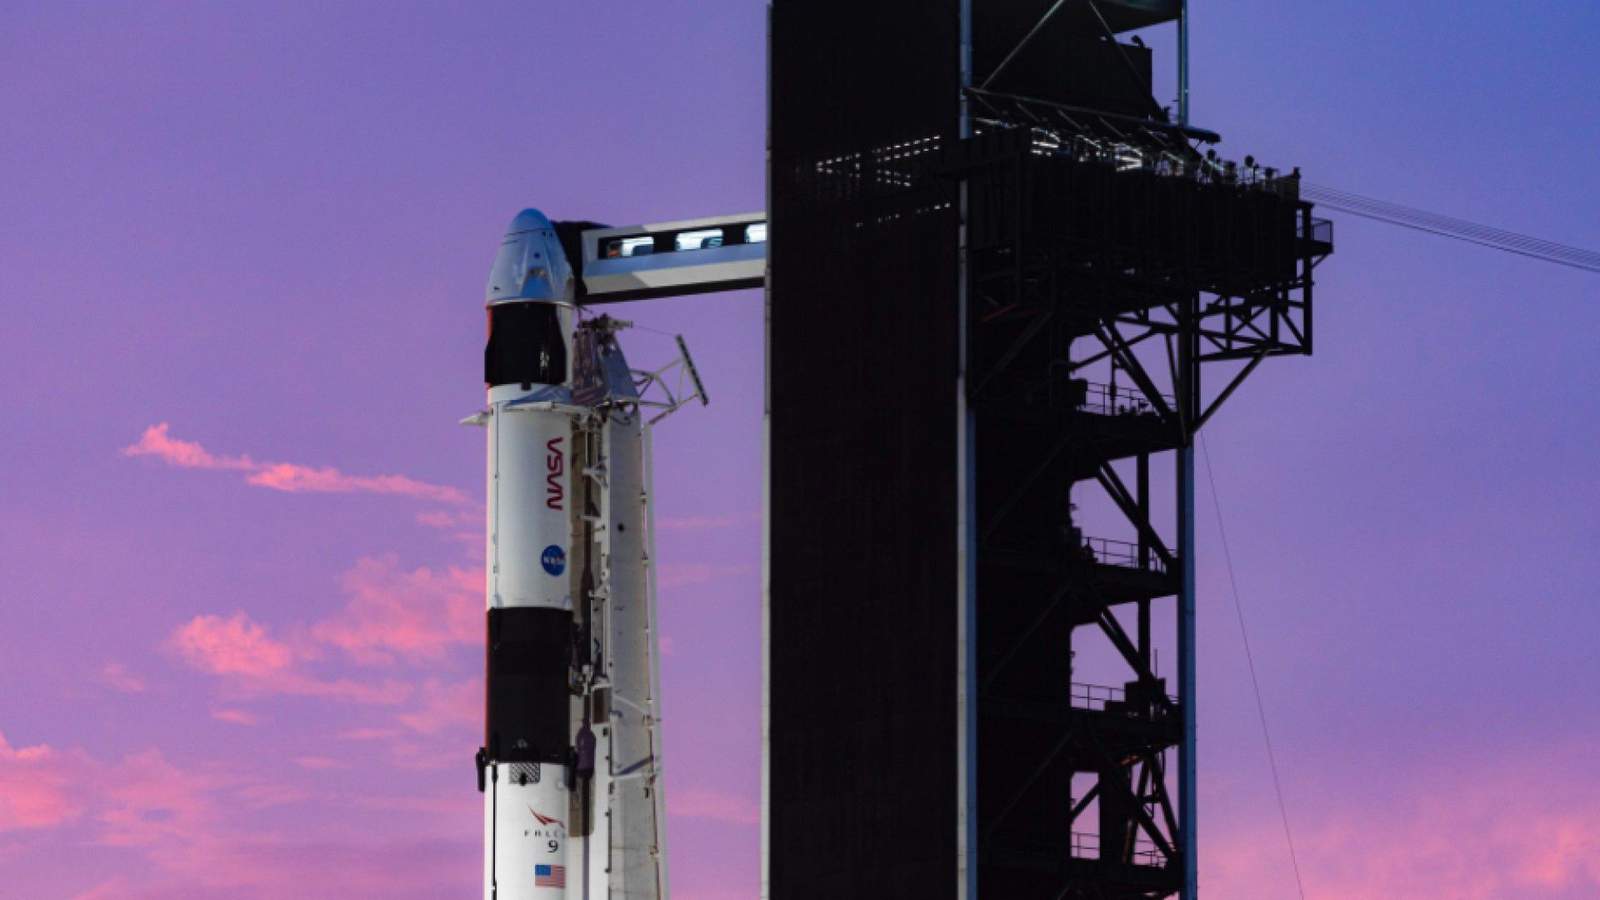 WATCH LIVE: News 6 weather briefings ahead of Crew-1 rocket launch